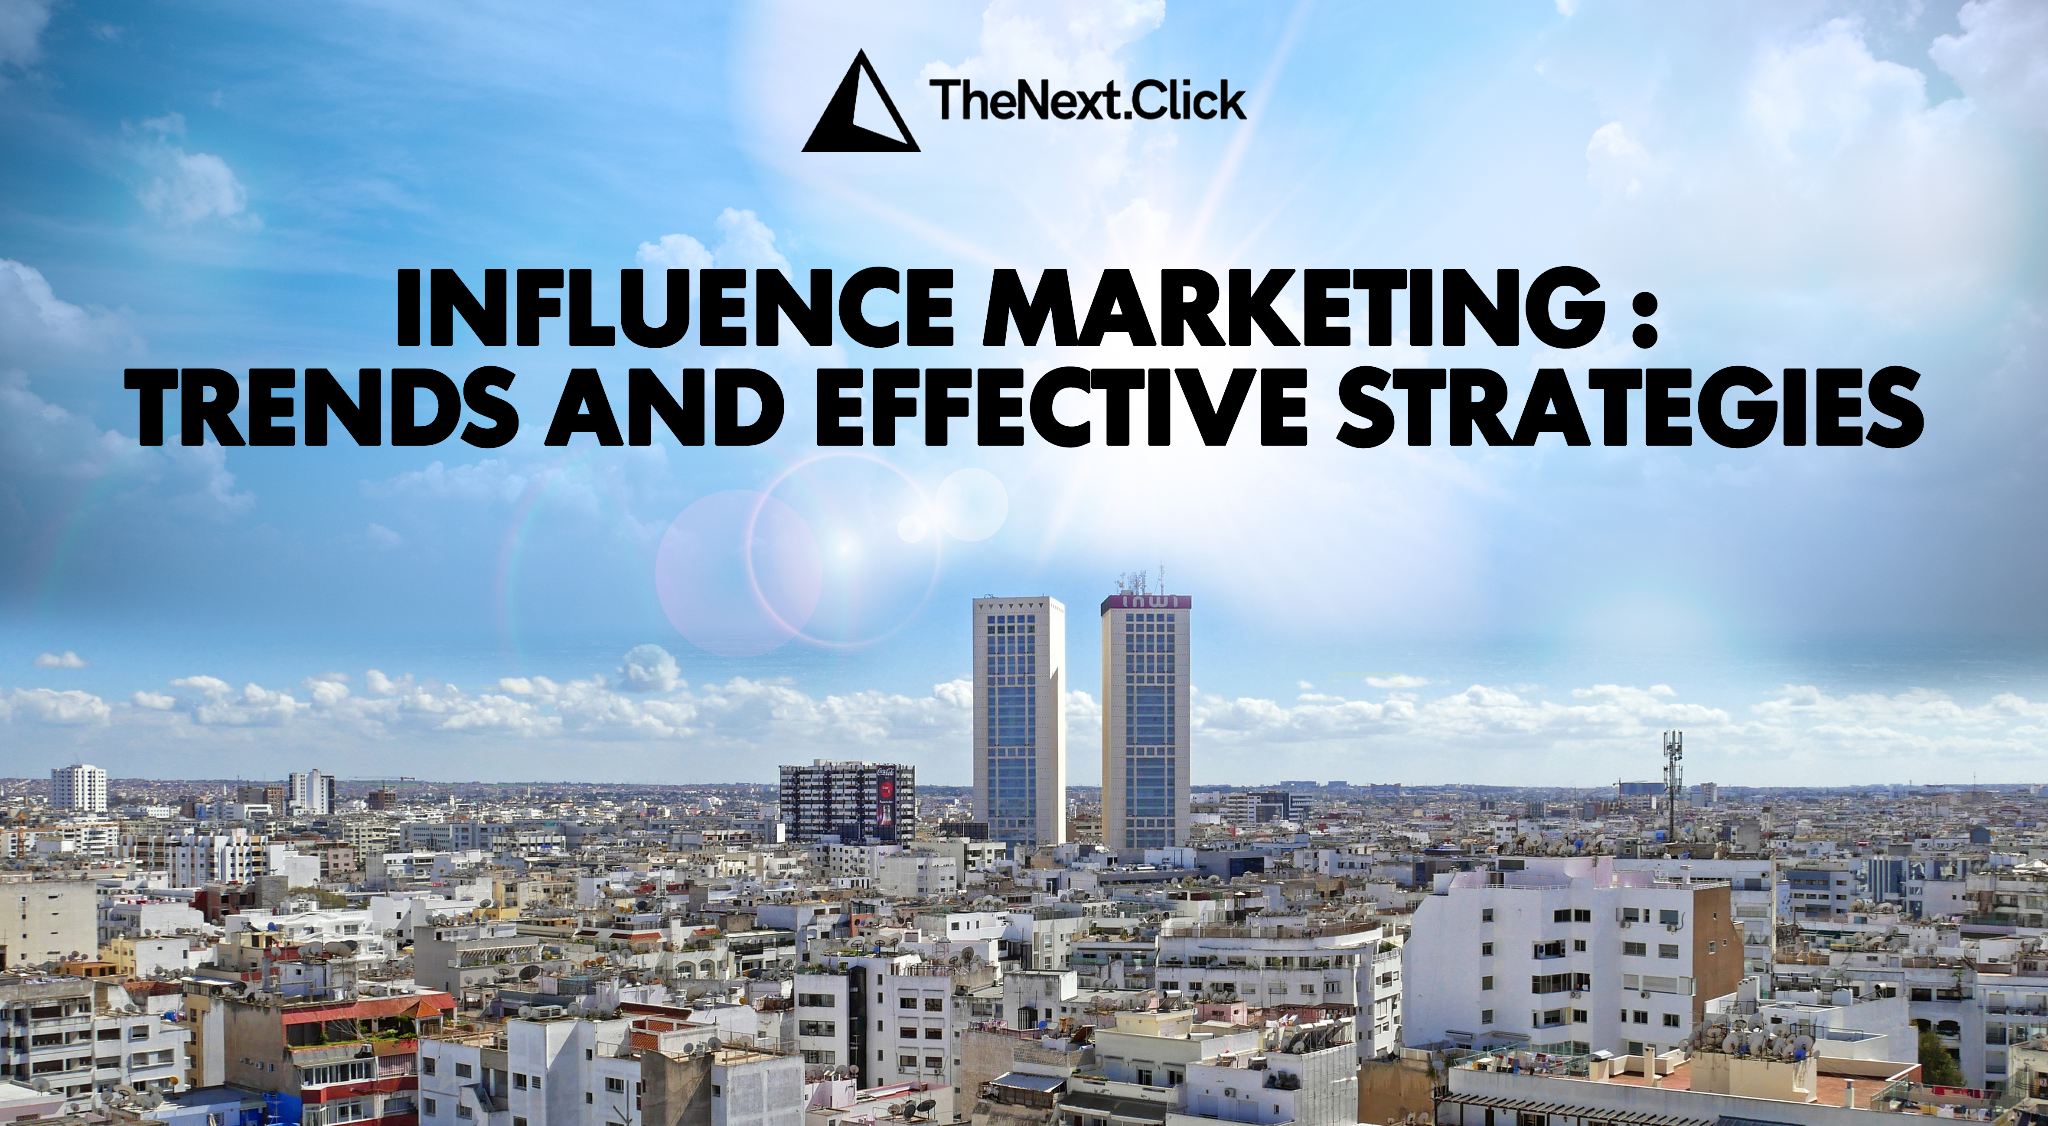 Influence Marketing: Trends and Effective Strategies